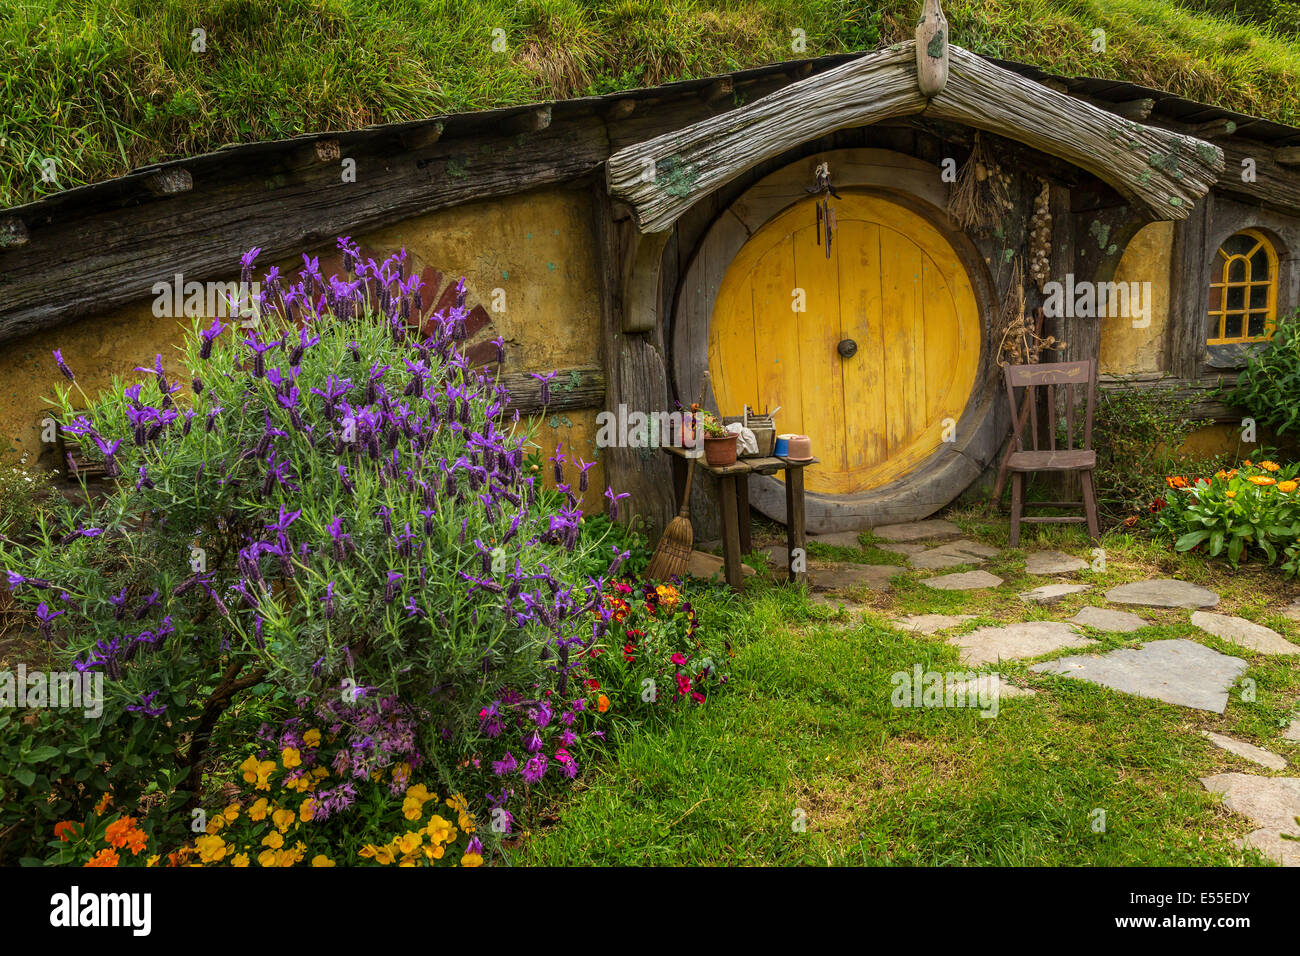 Hobbit-hole in Hobbiton, location of the Lord of the Rings and The Hobbit film trilogy, Hinuera, Matamata, New Zealand Stock Photo